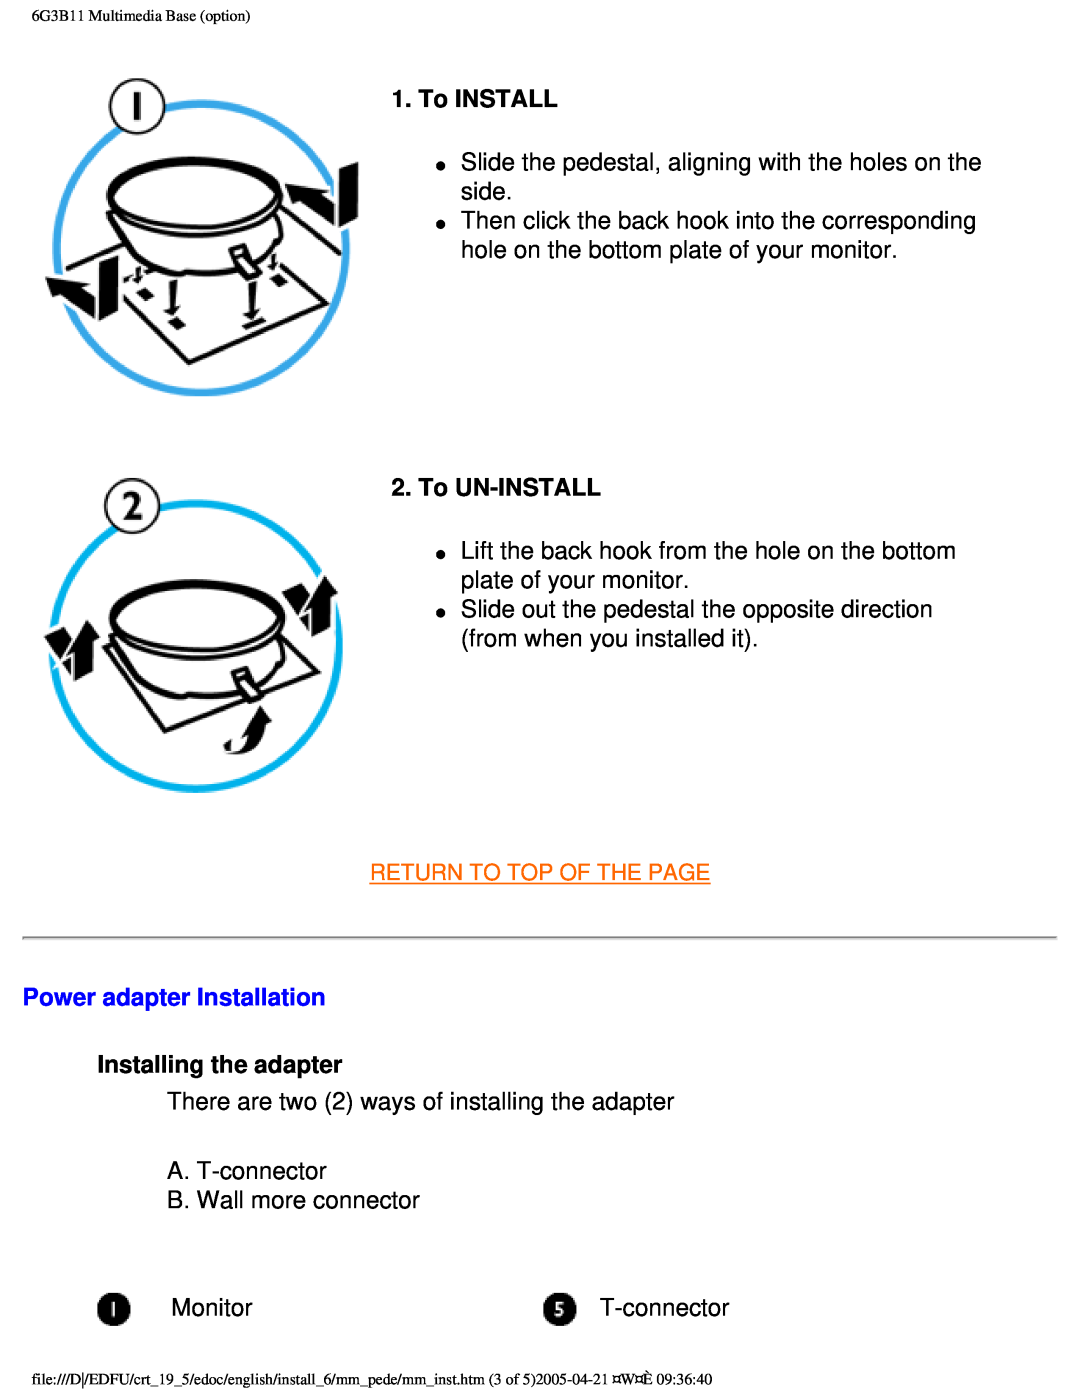 Philips 109F user manual To INSTALL, To UN-INSTALL, Power adapter Installation, Installing the adapter 